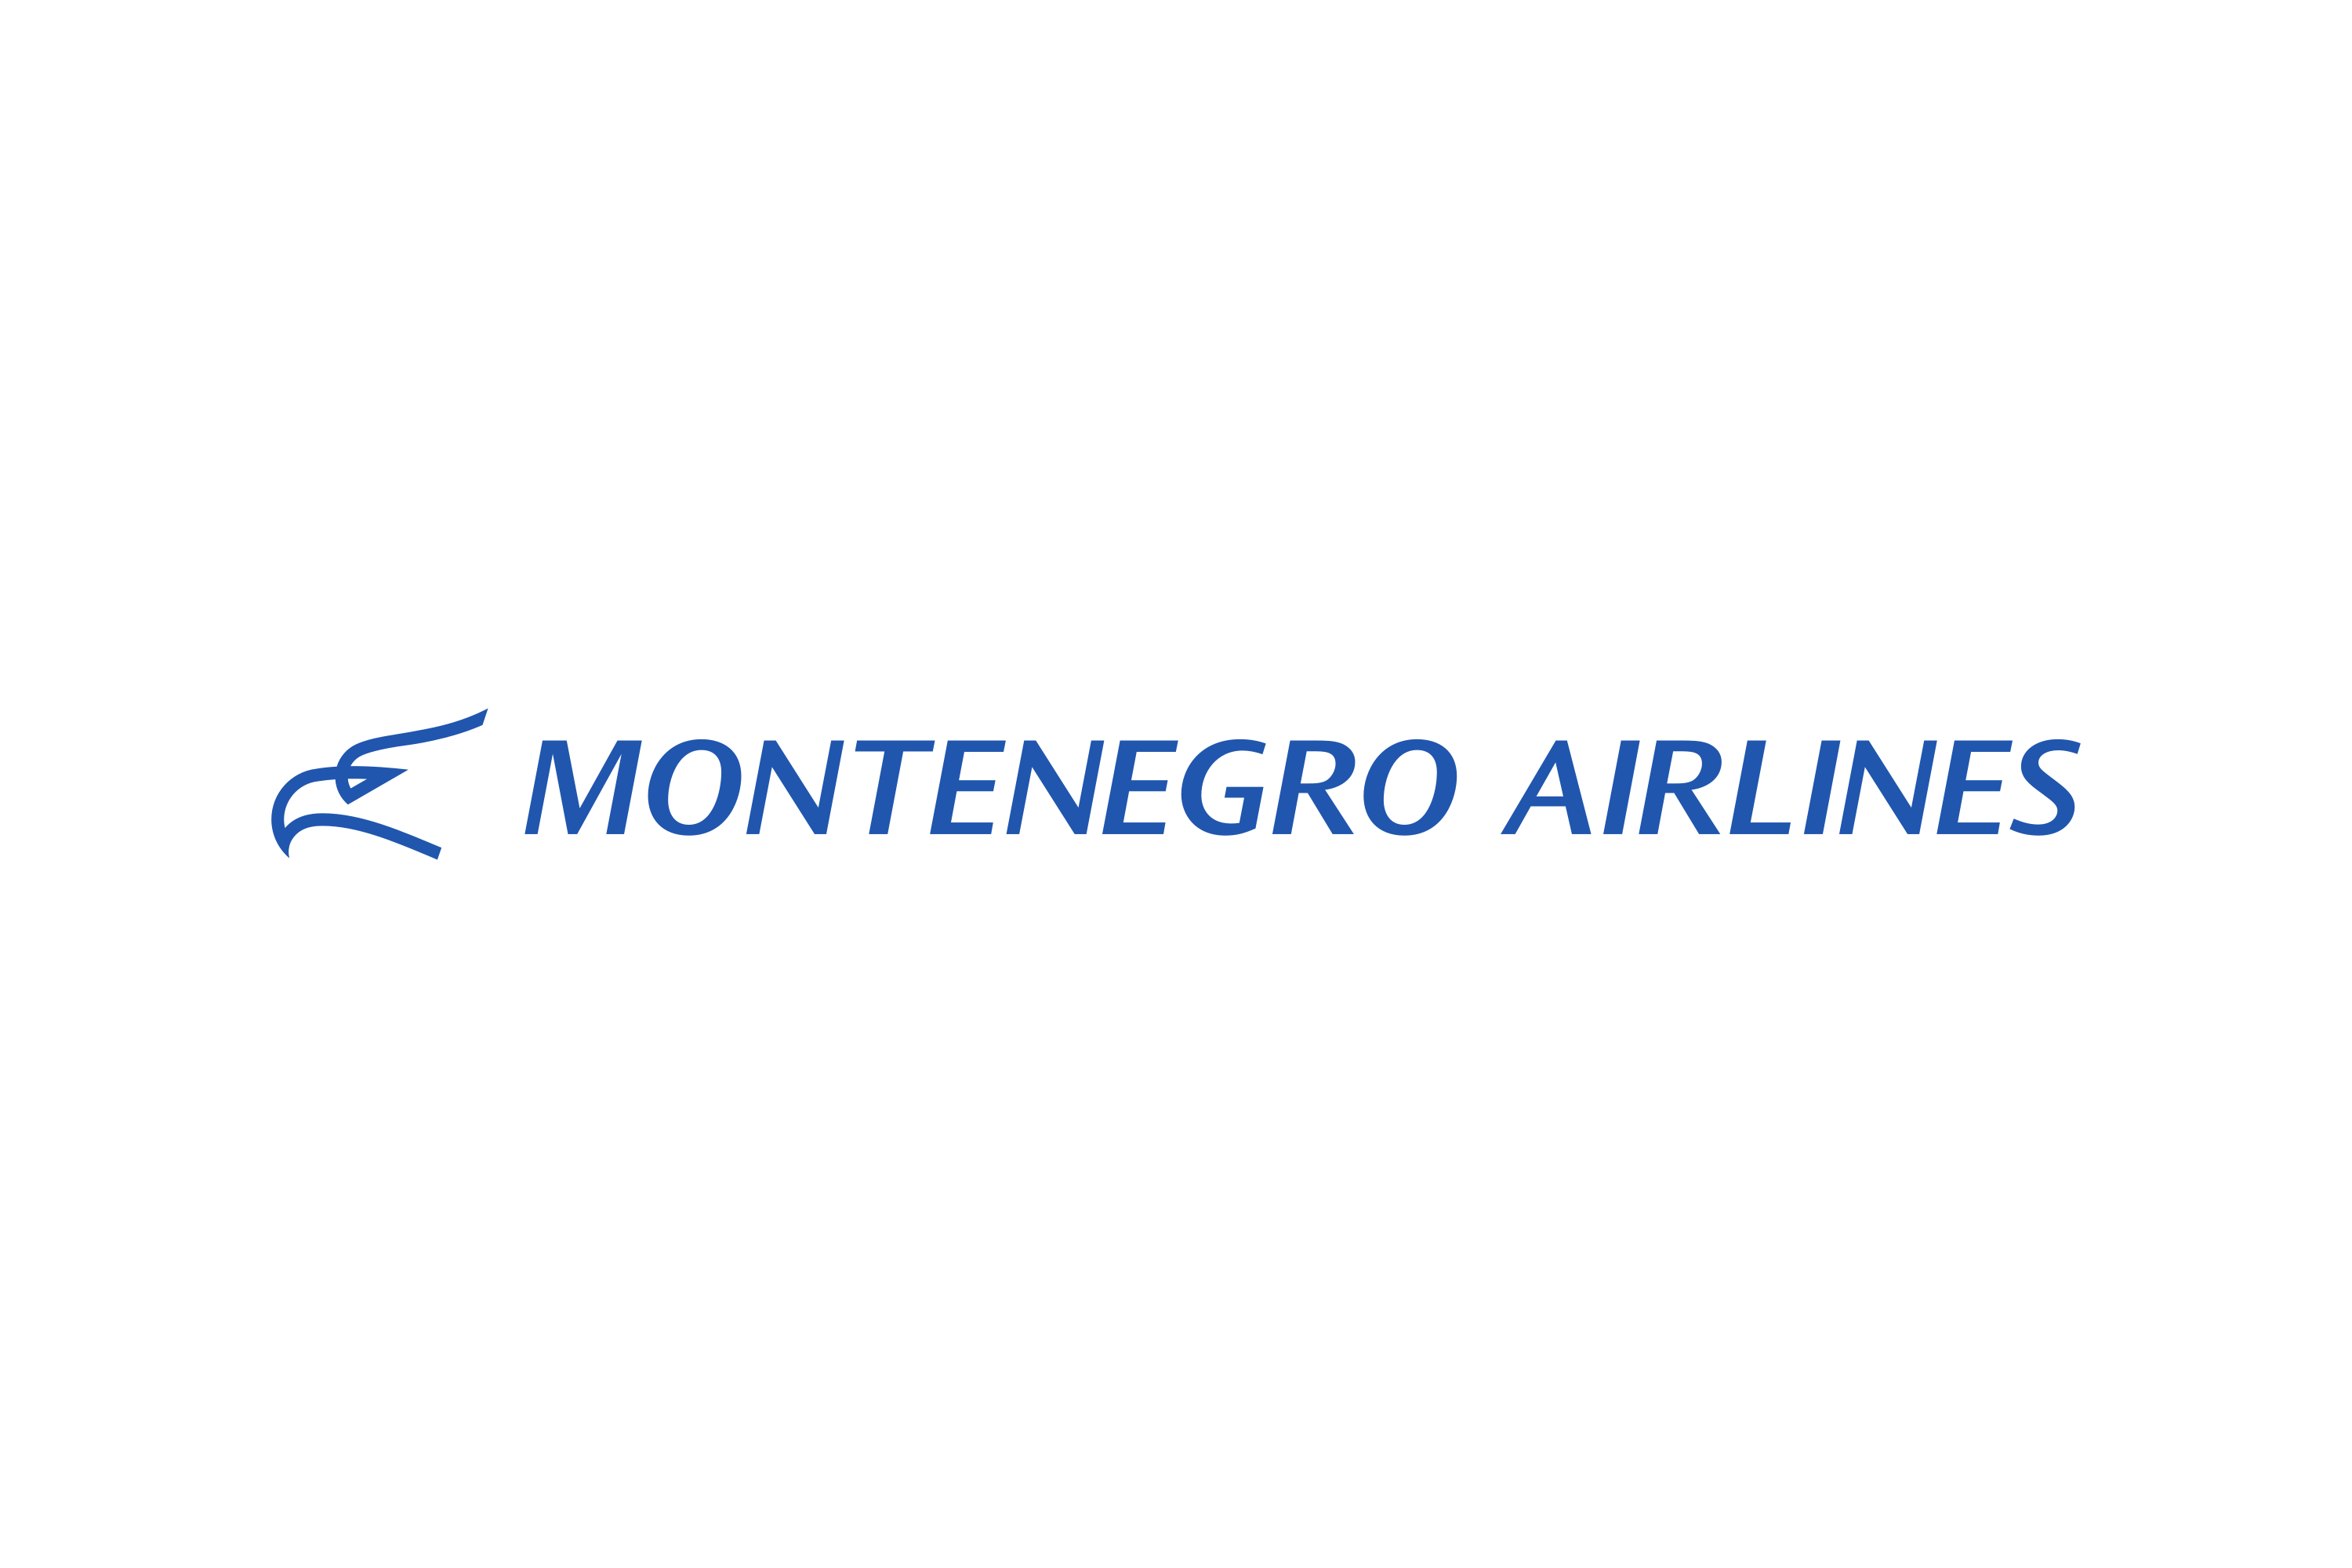 Download Montenegro Airlines Logo in SVG Vector or PNG File Format